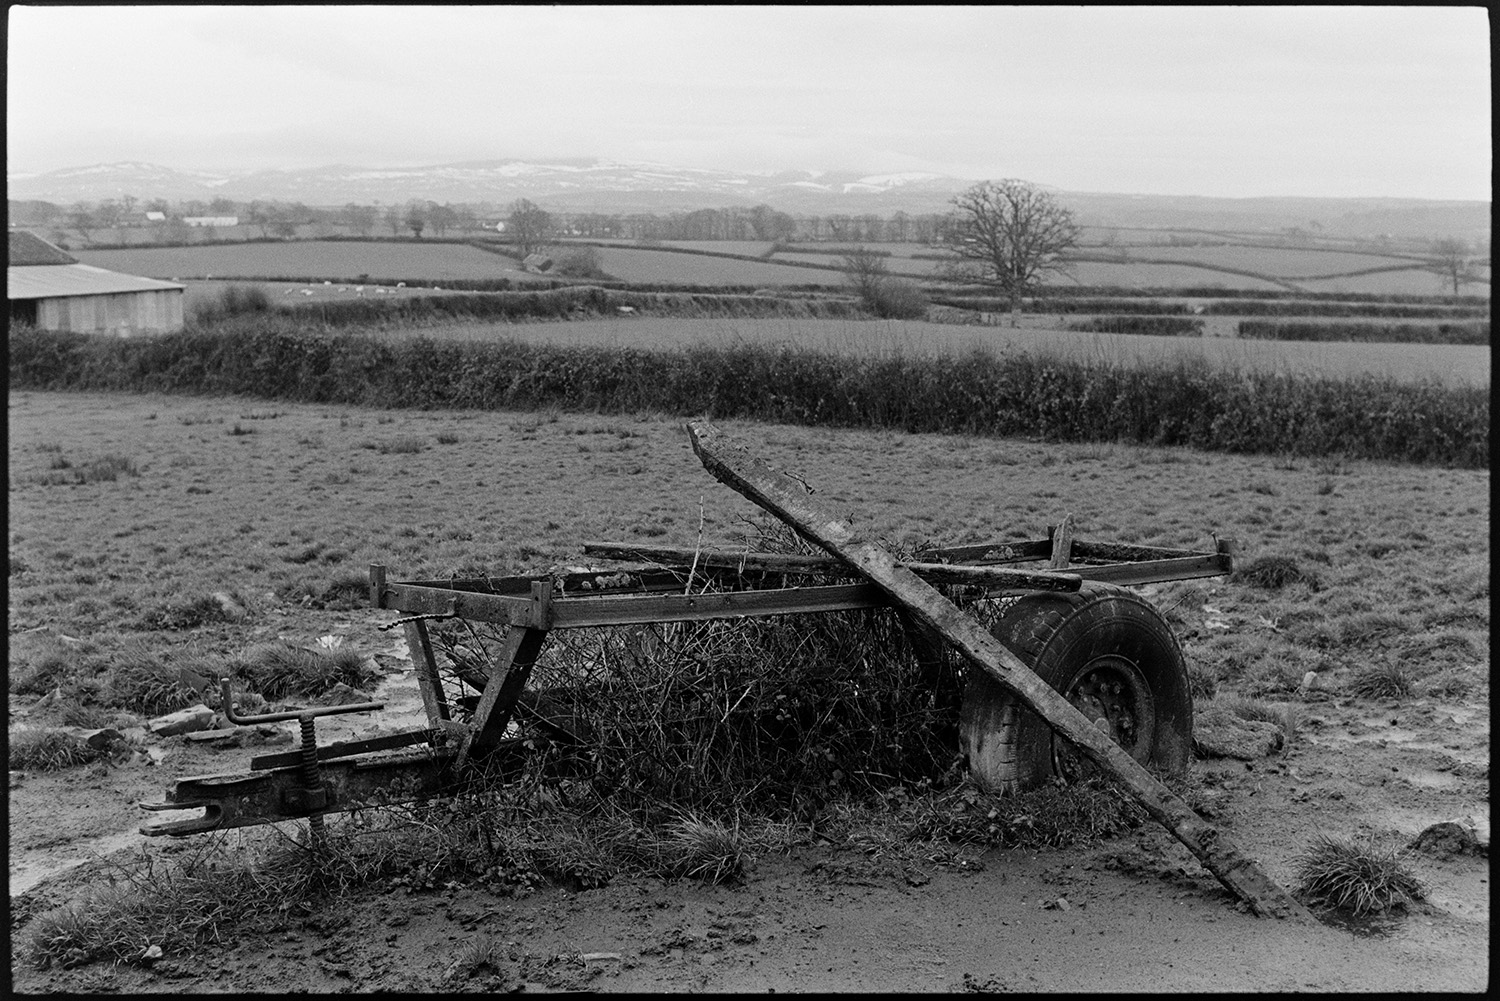 Farmer with flock of sheep, snowy moor in distance, muddy ground.
[The metal frame and wheels of an old trailer in the middle of a muddy field at Ingleigh Green.  Fields, trees, farm buildings and snow covered hills are visible in the distance.]